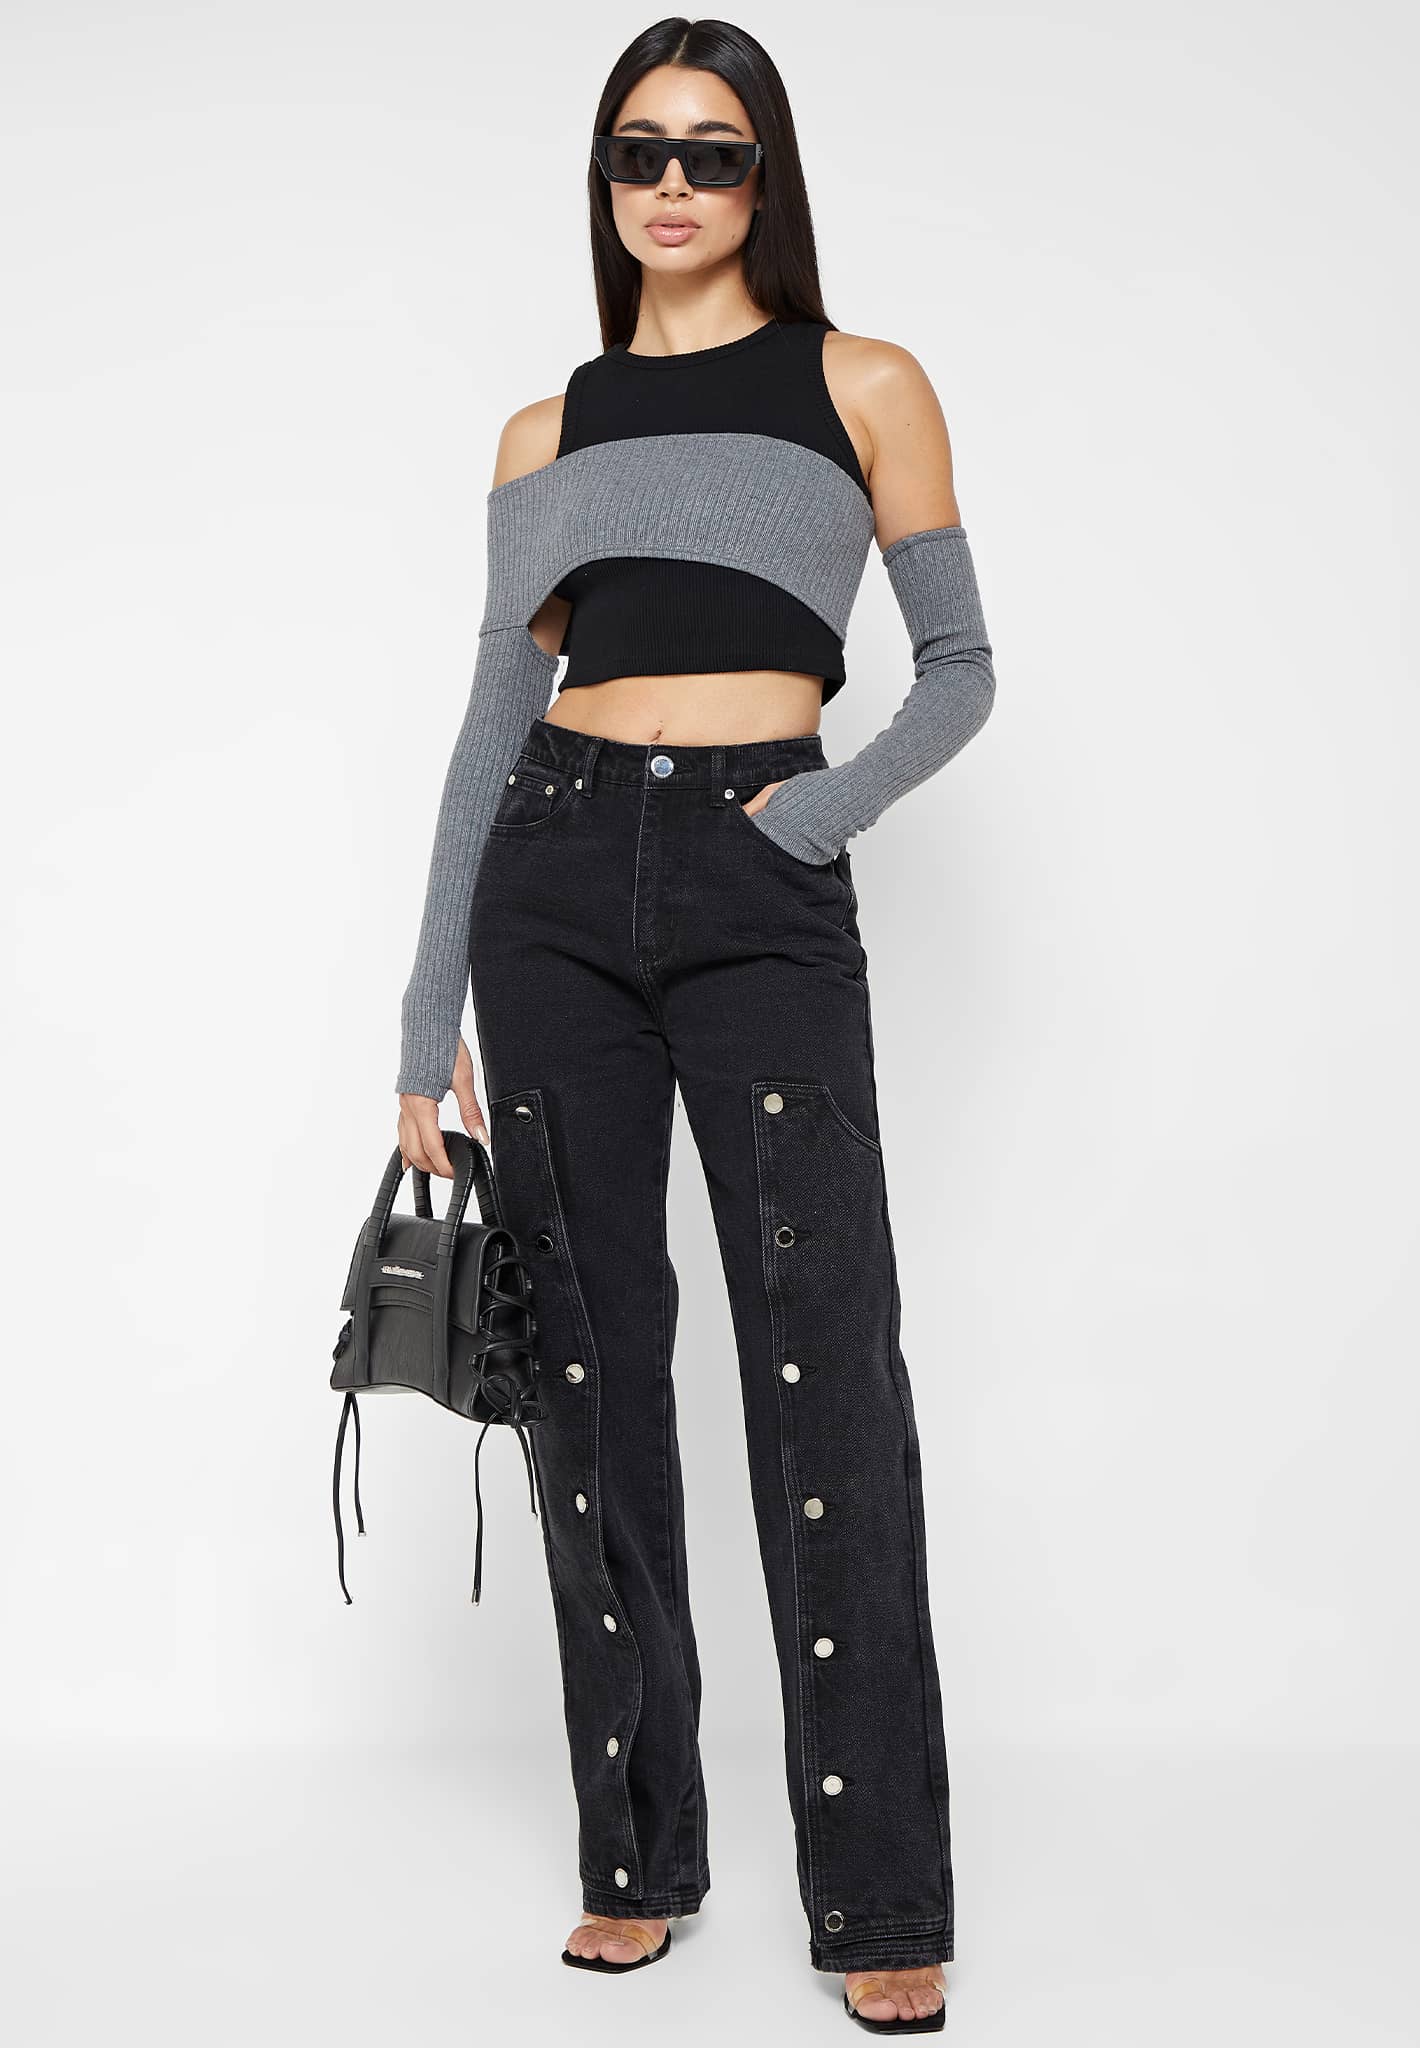 crop-top-with-knitted-overlay-black-grey